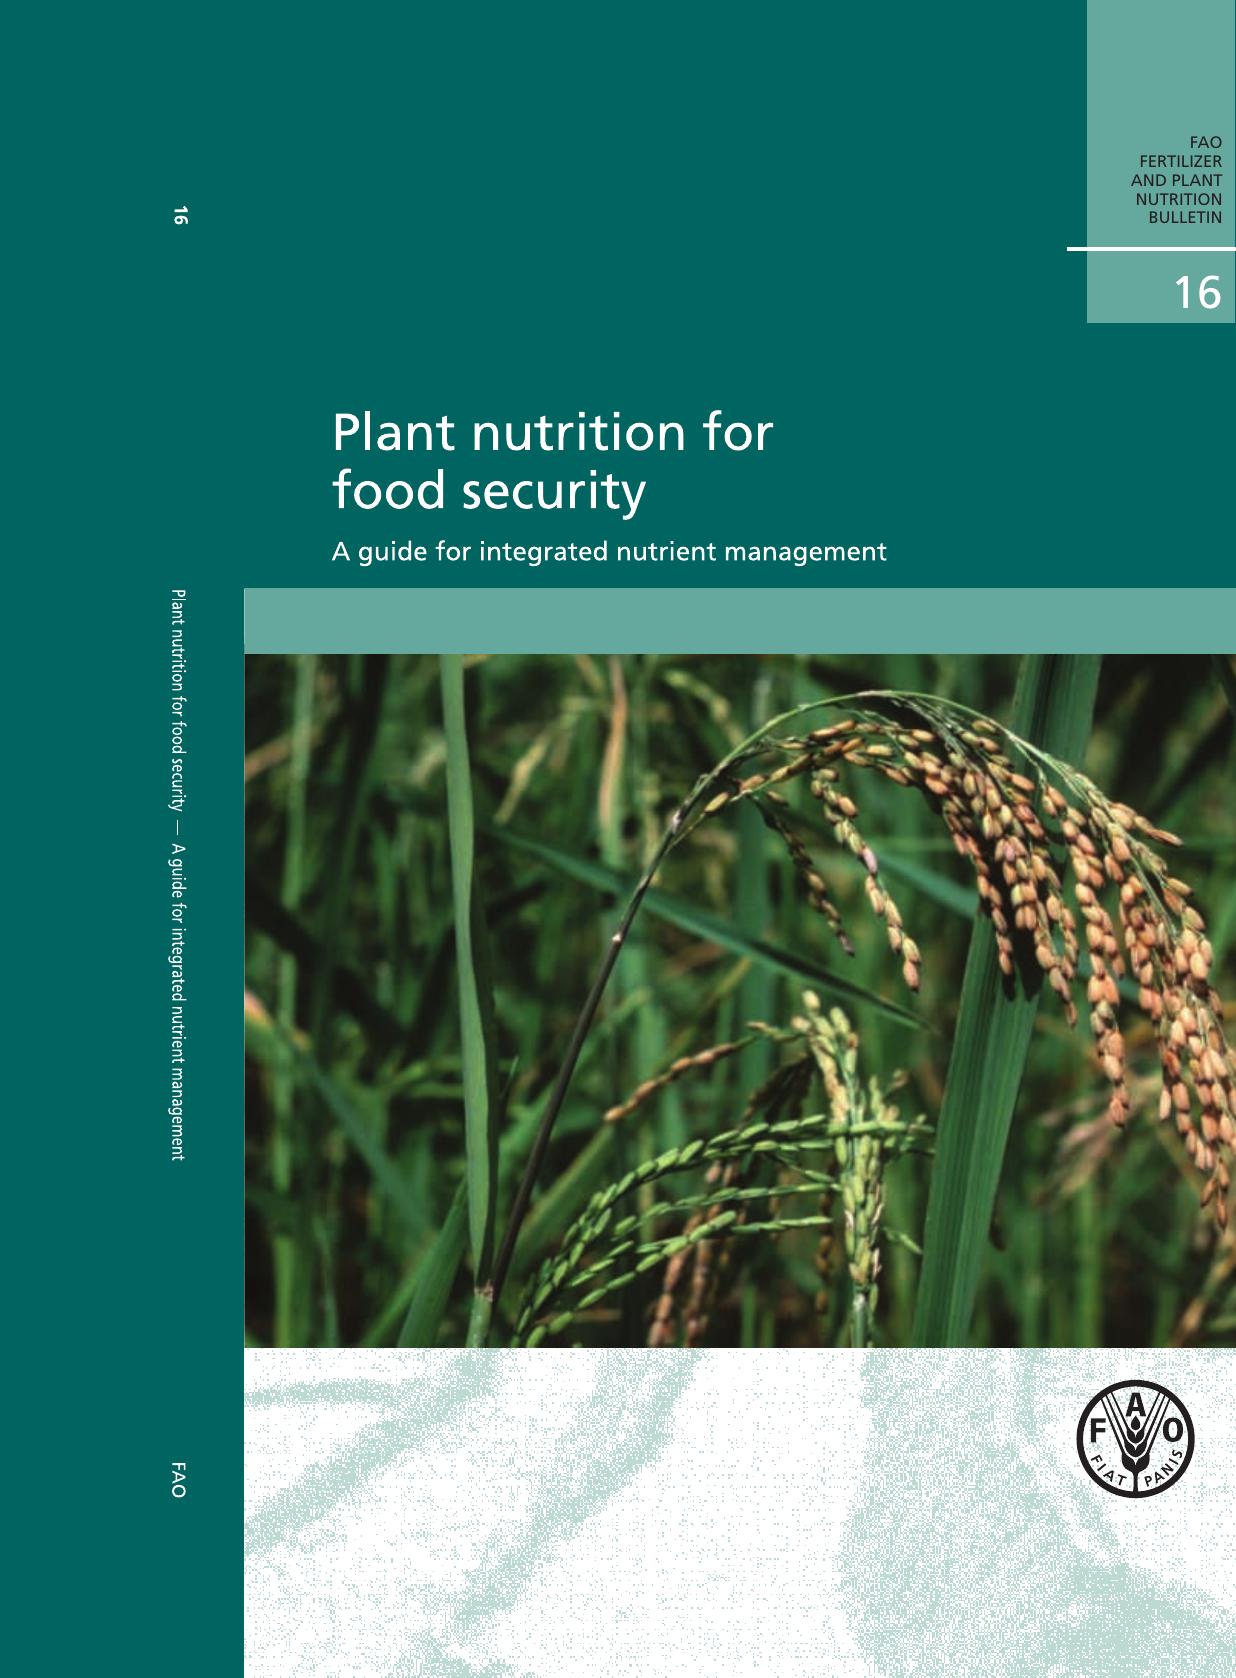 Plant nutrition for food security. 2006